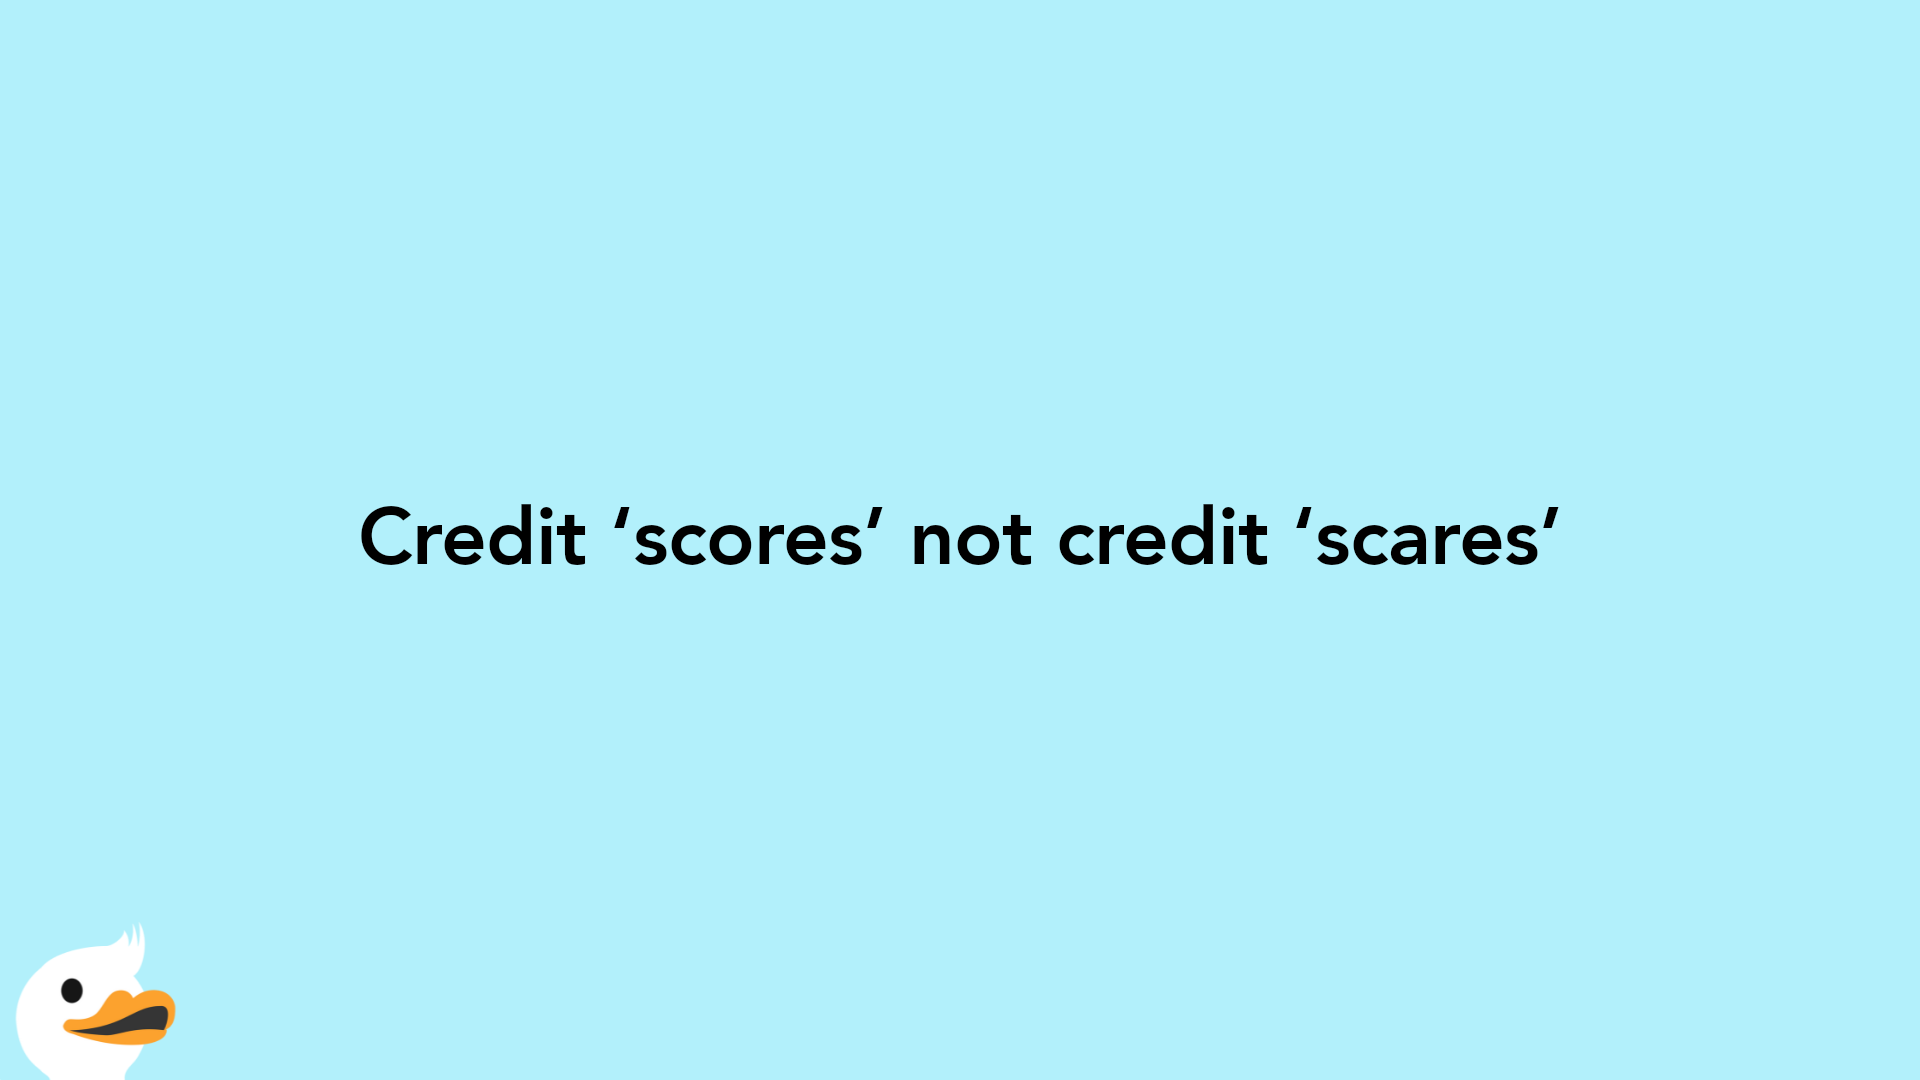 Credit ‘scores’ not credit ‘scares’